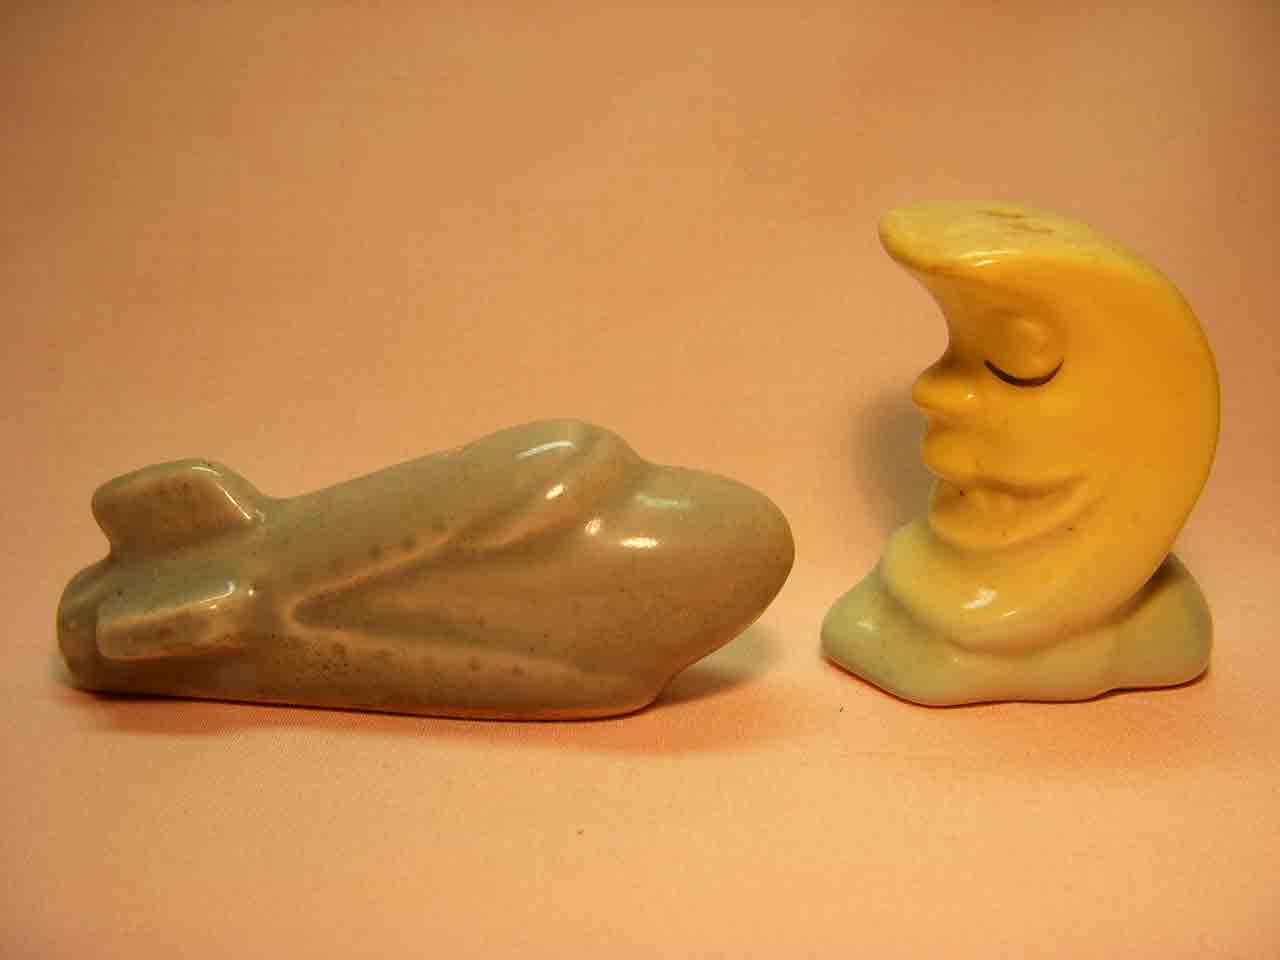 Go with rocket ship with anthropomorphic moon salt and pepper shaker